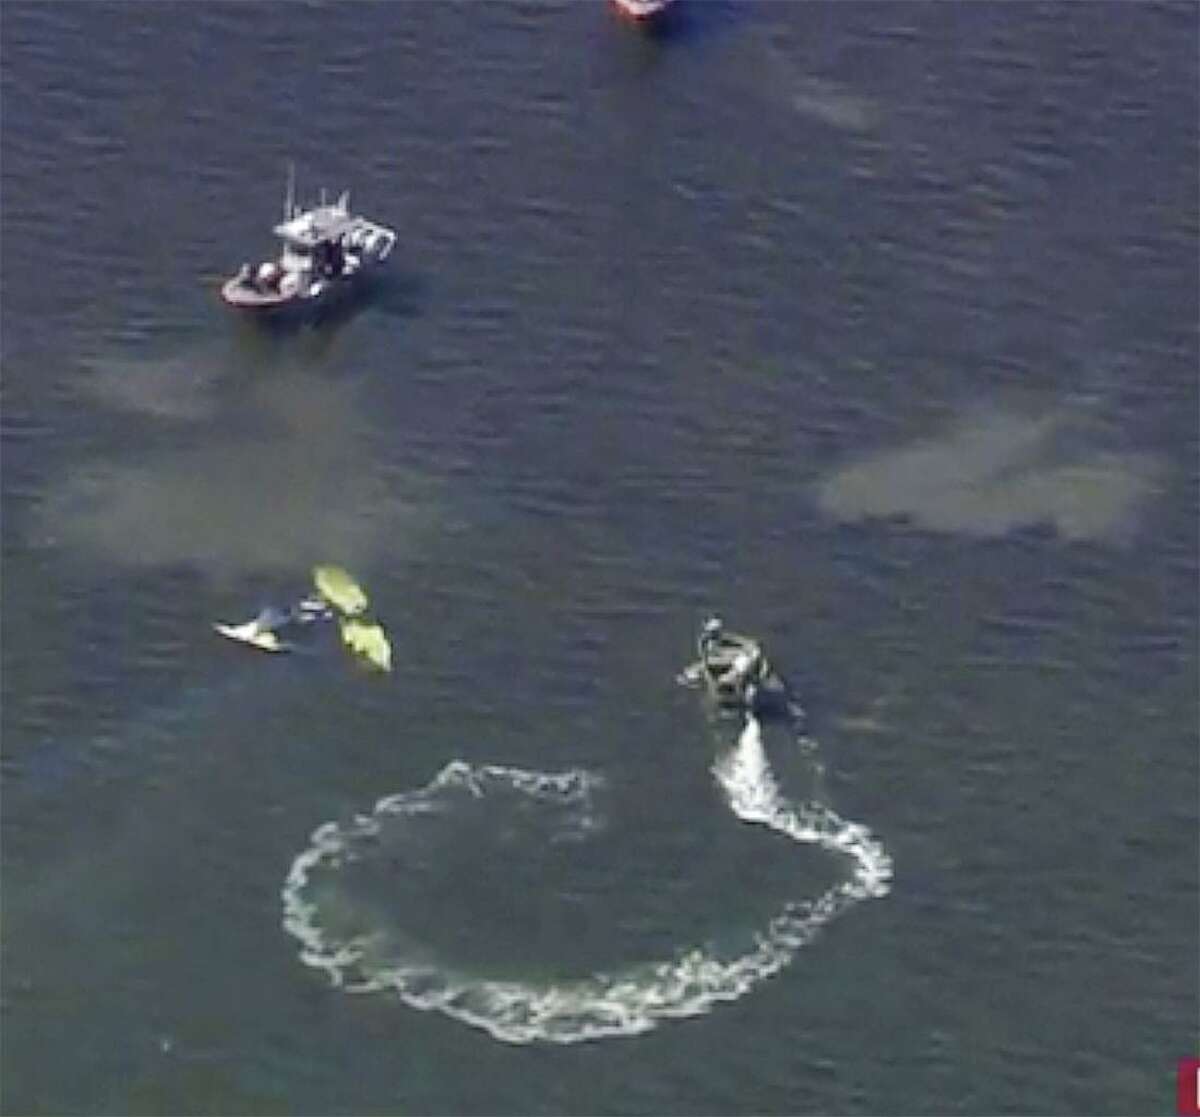 In this image provided by WTVT-TV FOX 13 Tampa Bay, authorities investigate a small plane crash in the Gulf of Mexico, near Holiday, Fla. on Tuesday, Nov. 7, 2017. Authorities have confirmed that former Major League Baseball pitcher Roy Halladay died in a small plane crash in the Gulf of Mexico off the coast of Florida. (WTVT-TV FOX 13 Tampa Bay, via AP)